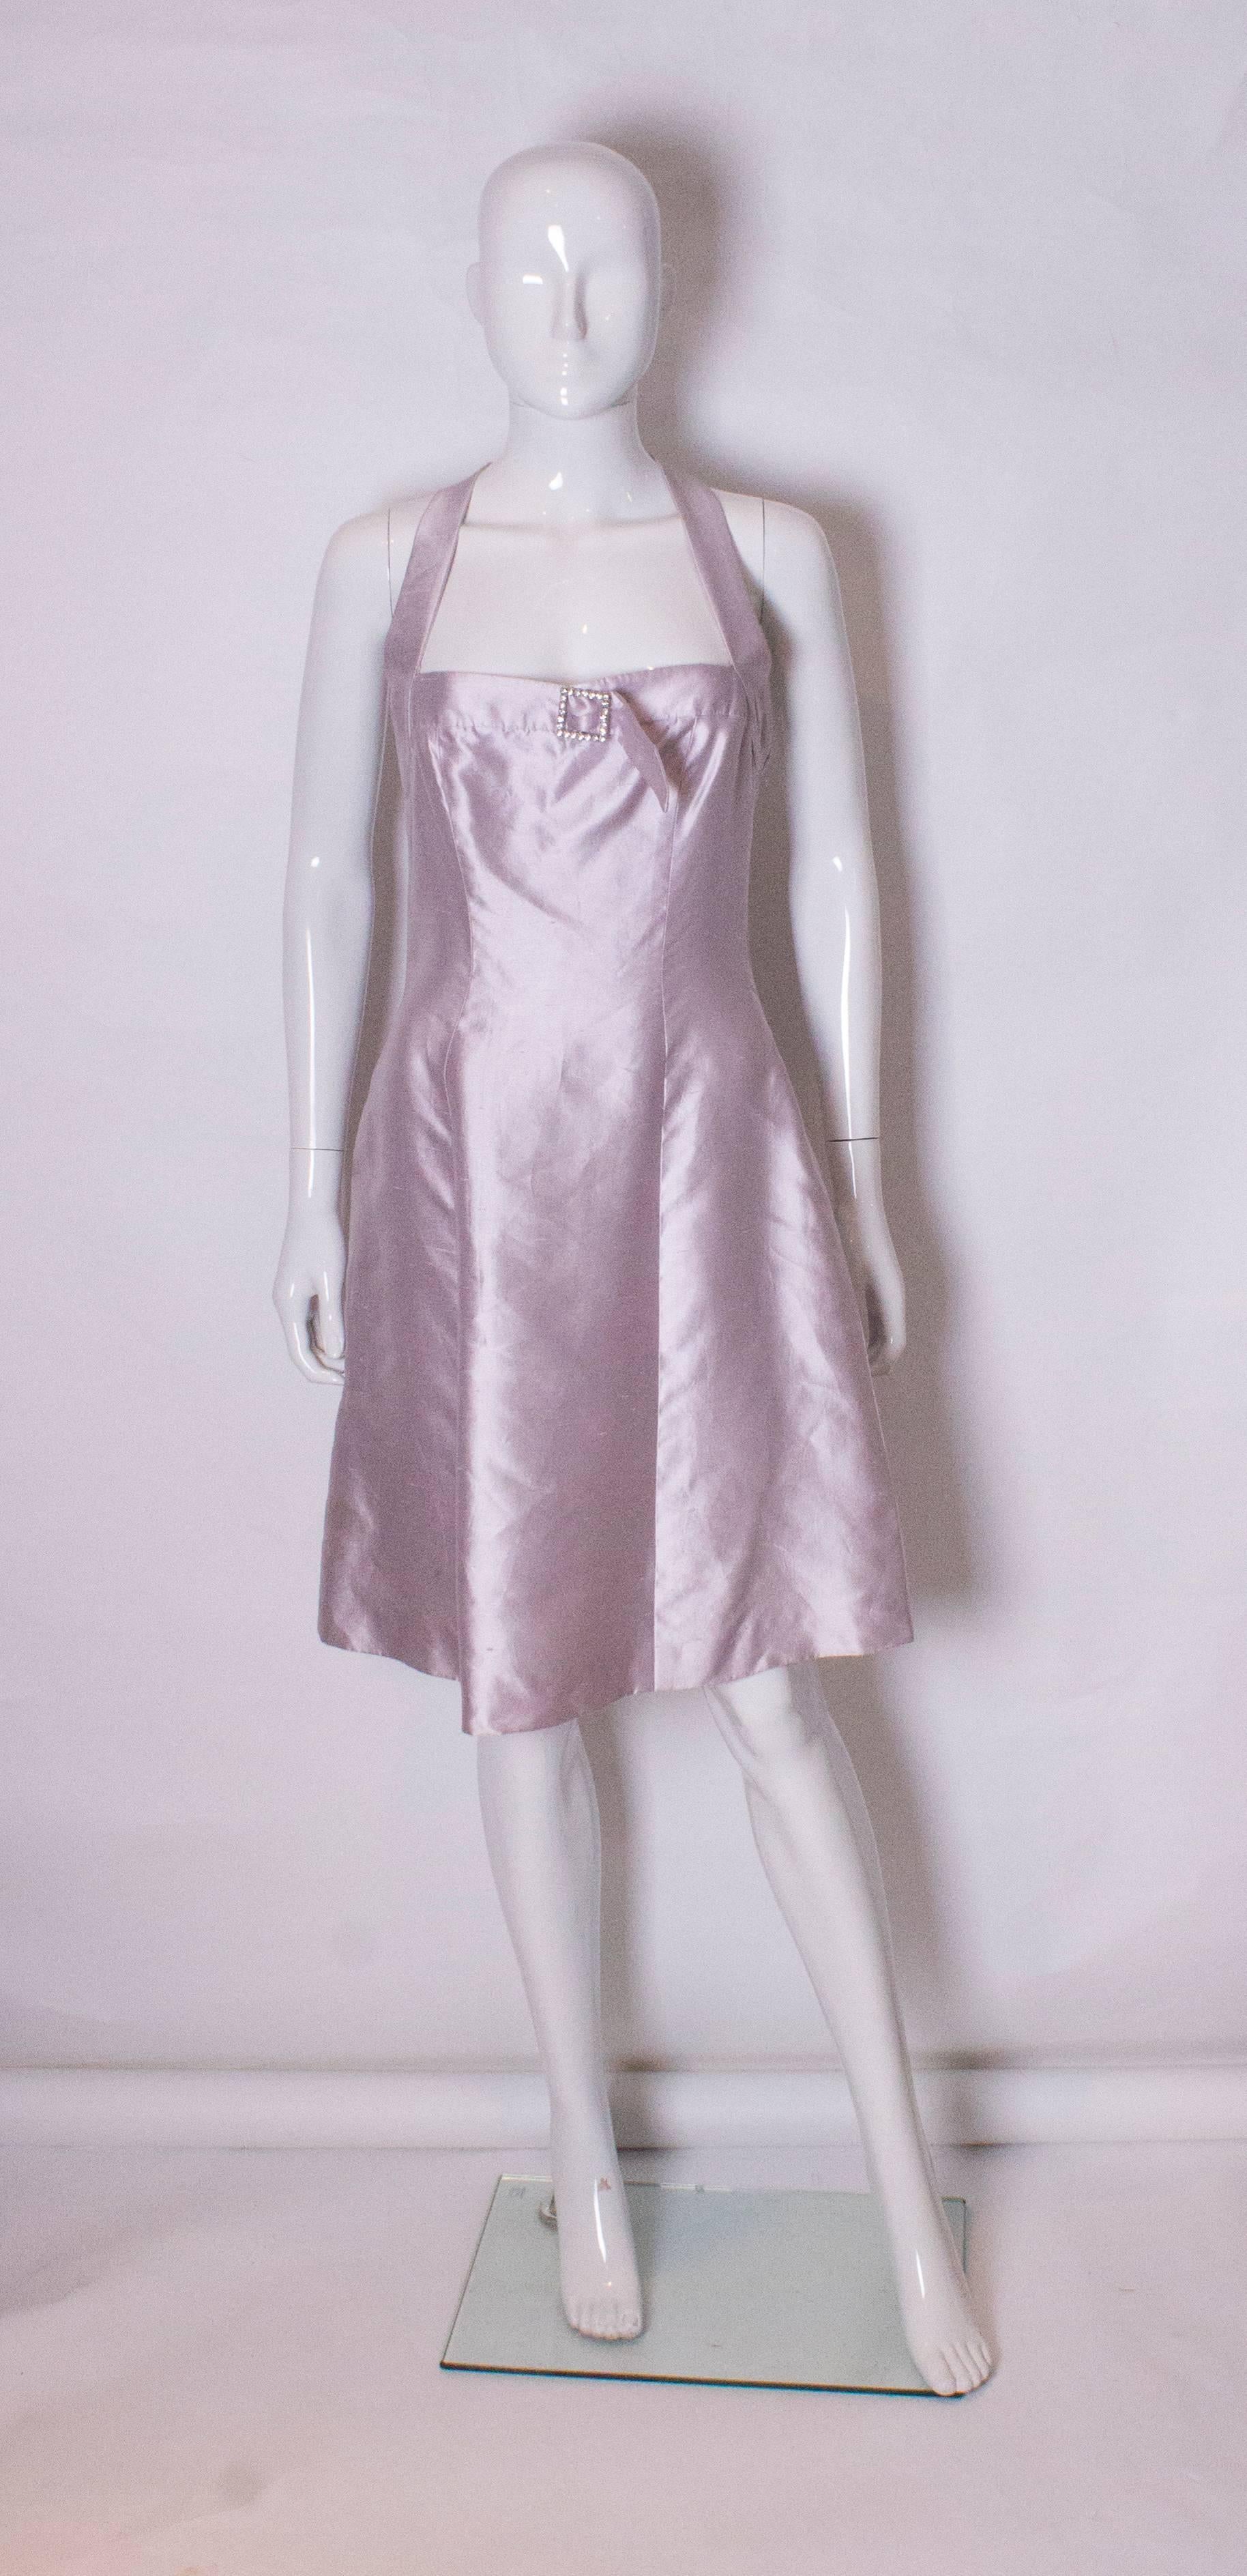 A chic cocktail dress by British designer Bruce Oldfield. The dress is in a pale lilac/ silver silk, and is fully lined. The dress has an interesting t detail at the back and a diamante buck on the bust.